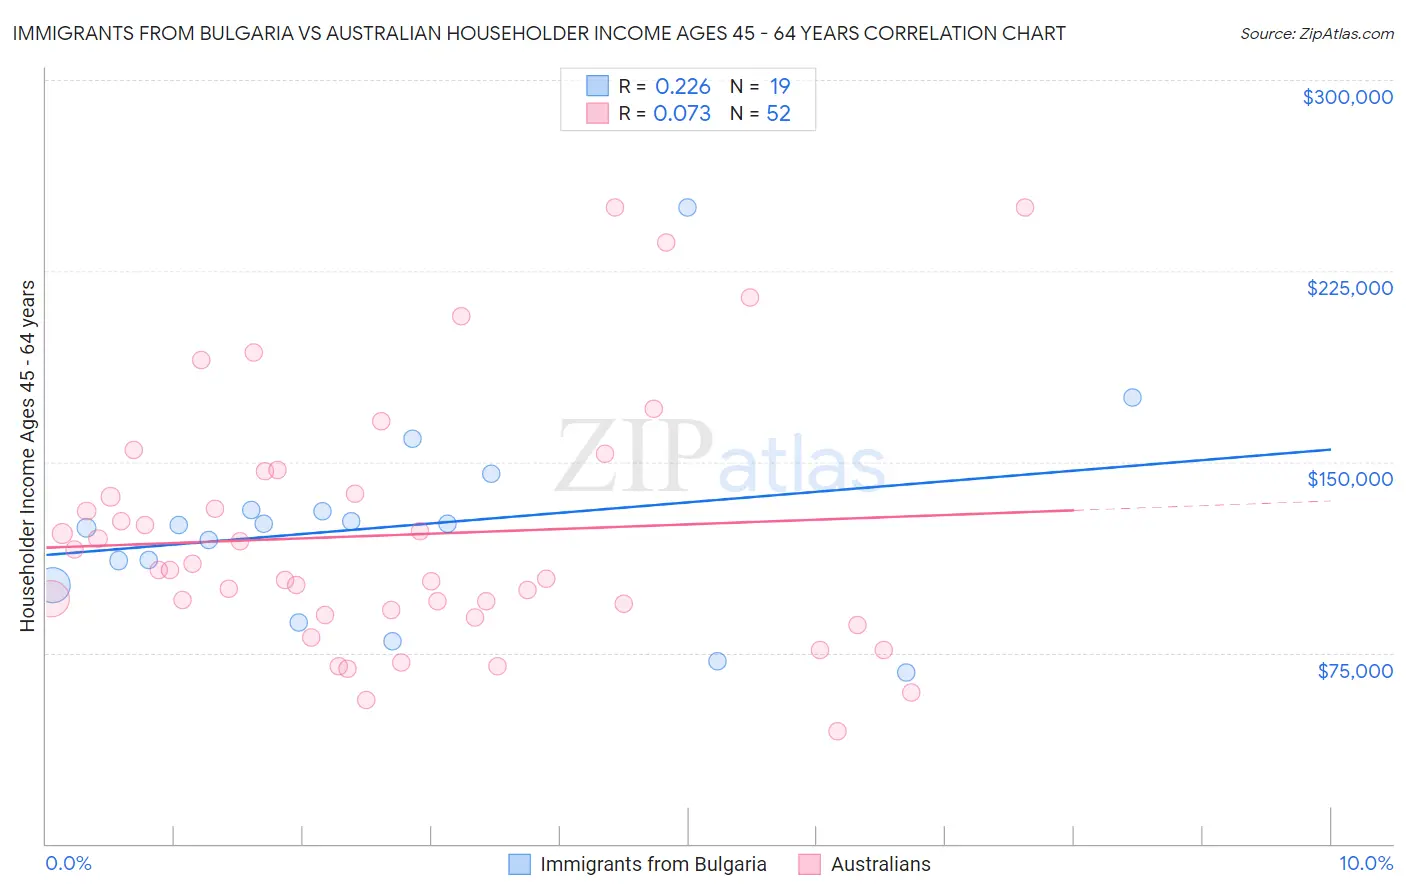 Immigrants from Bulgaria vs Australian Householder Income Ages 45 - 64 years